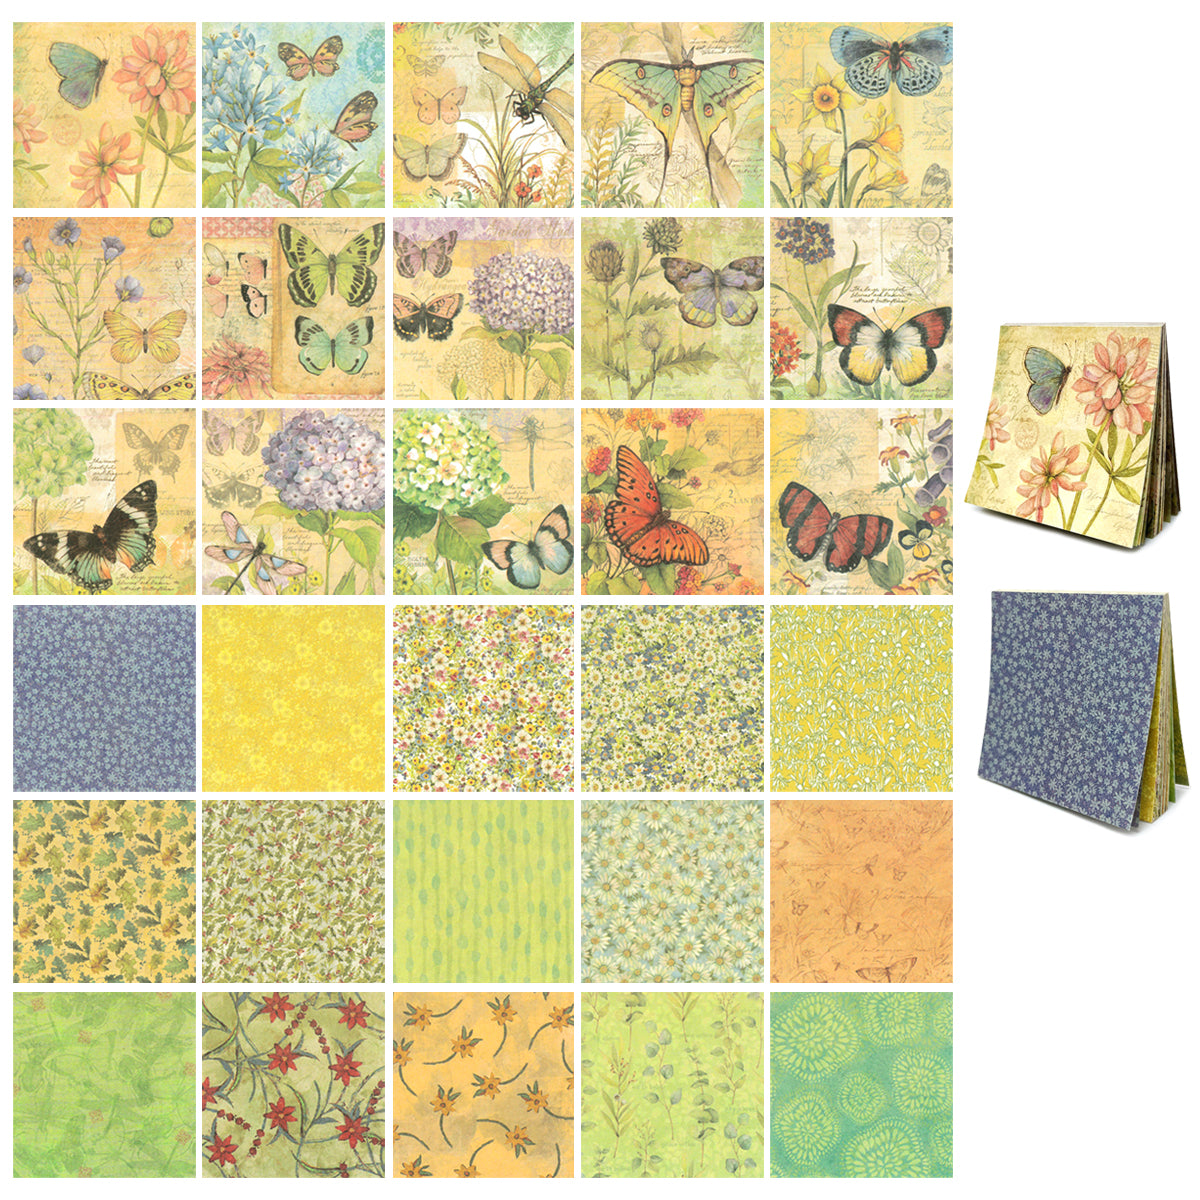 Wrapables Decorative Scrapbook Paper for Journals, Scrapbooking, Stationery, Arts & Crafts Projects (Set of 2)